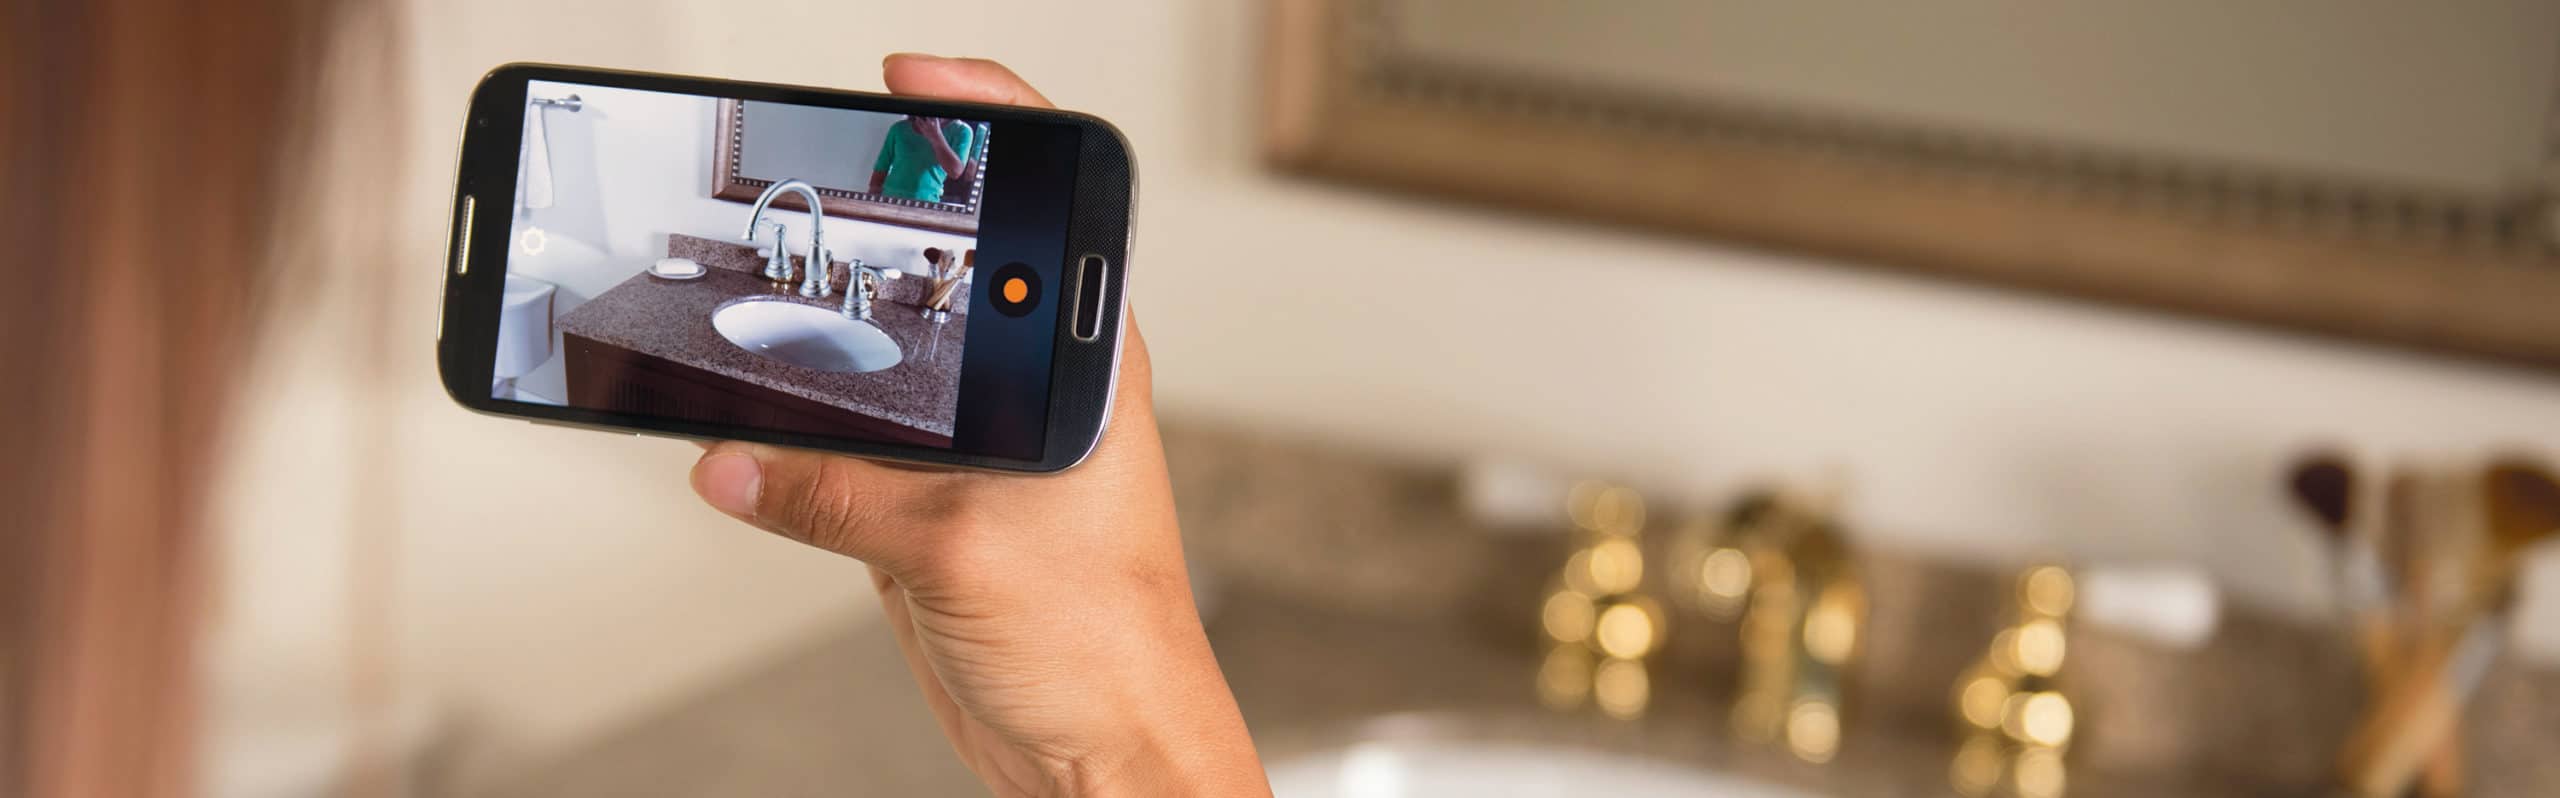 Case Study: Home Depot Boosts Conversions with Web AR